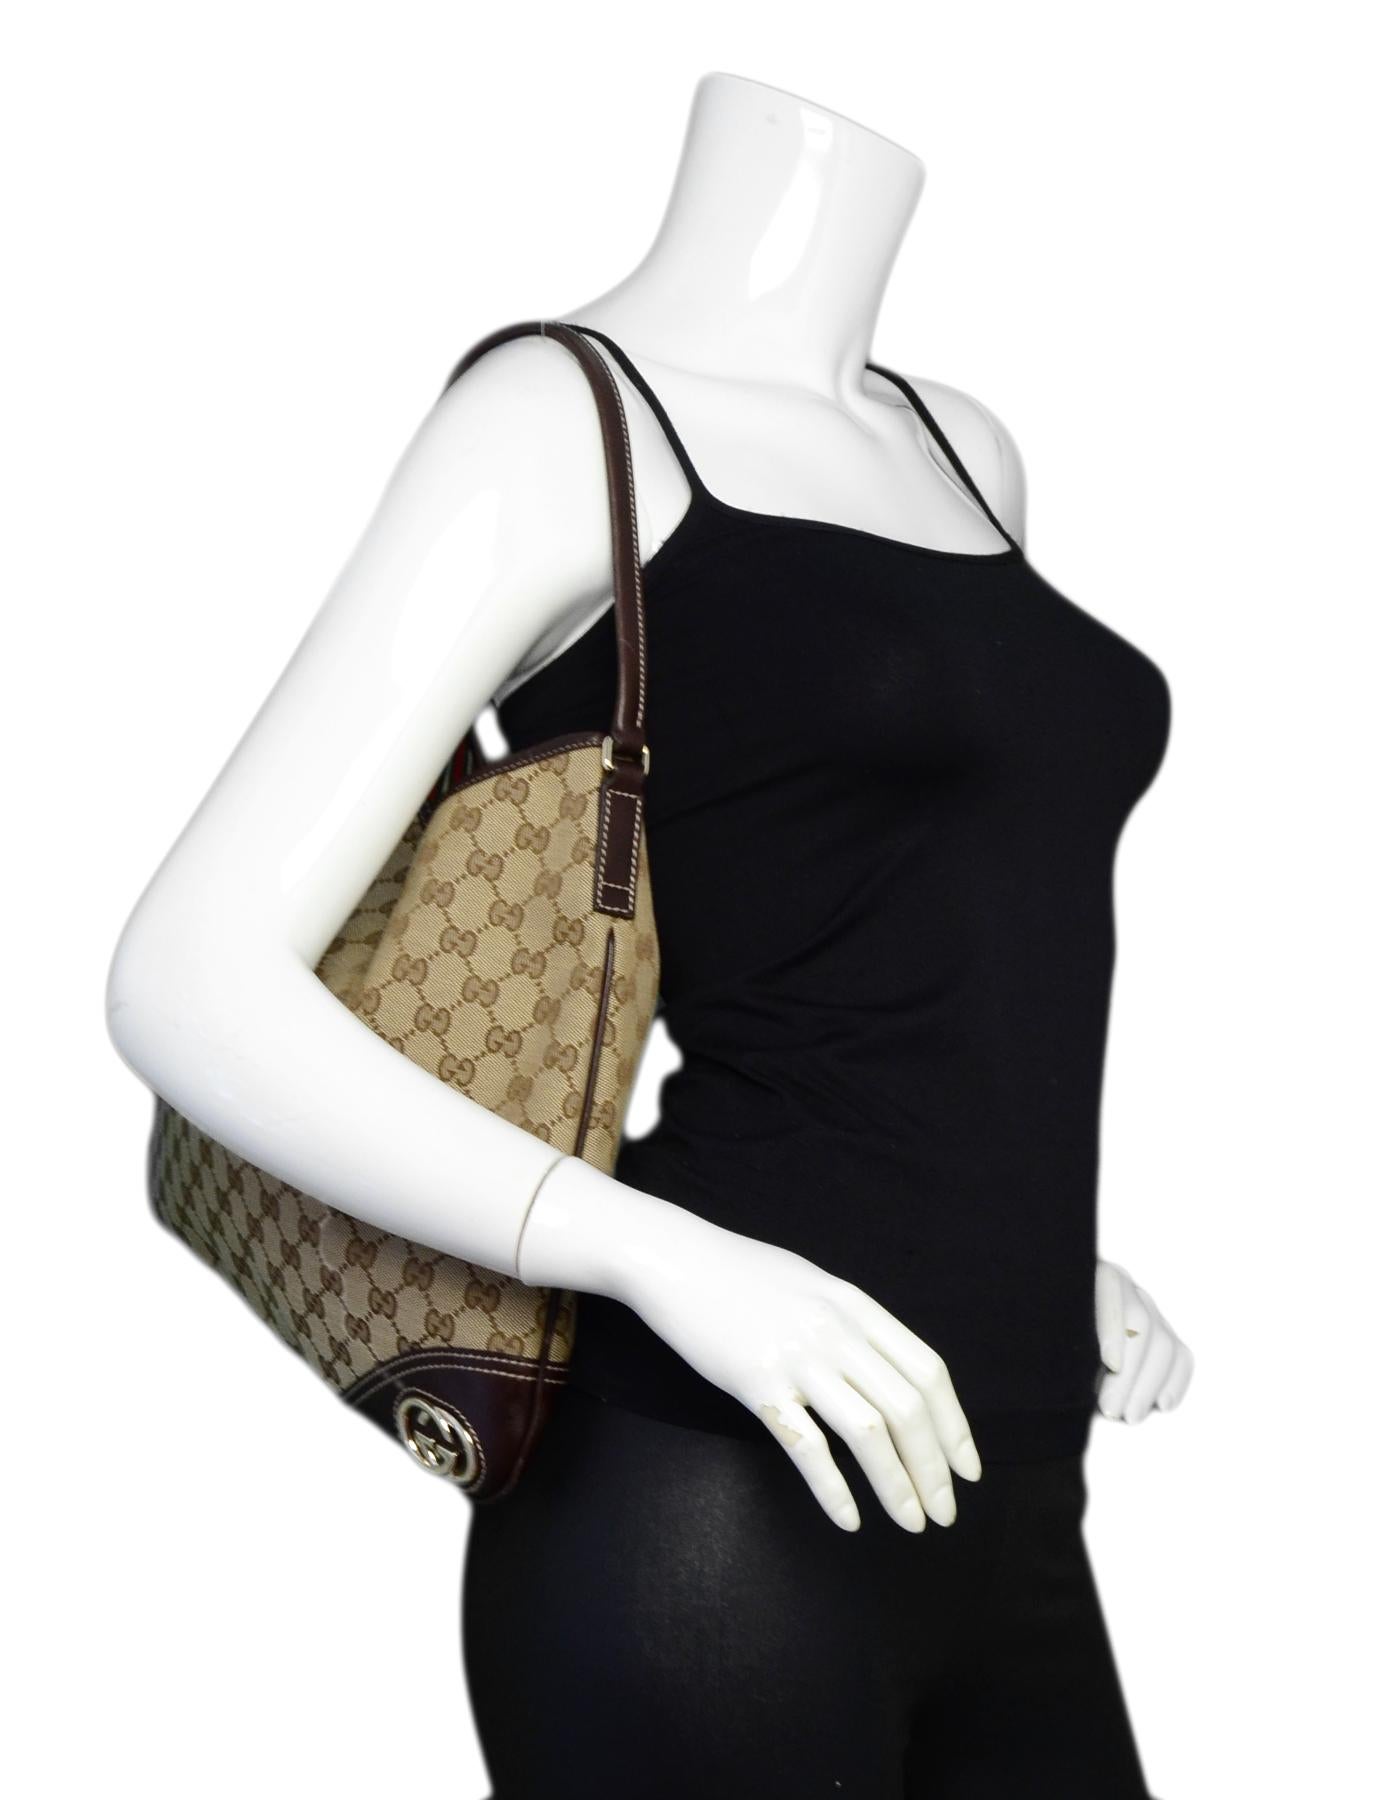 Gucci Monogram Canvas Britt Hobo Bag w/ Leather Trim

Made In: Italy
Color: Beige
Hardware: Silvertone hardware
Materials: Coated canvas, leather trim
Lining: Striped textile lining
Closure/Opening: Magnetic snap
Exterior Pockets: N/A
Interior